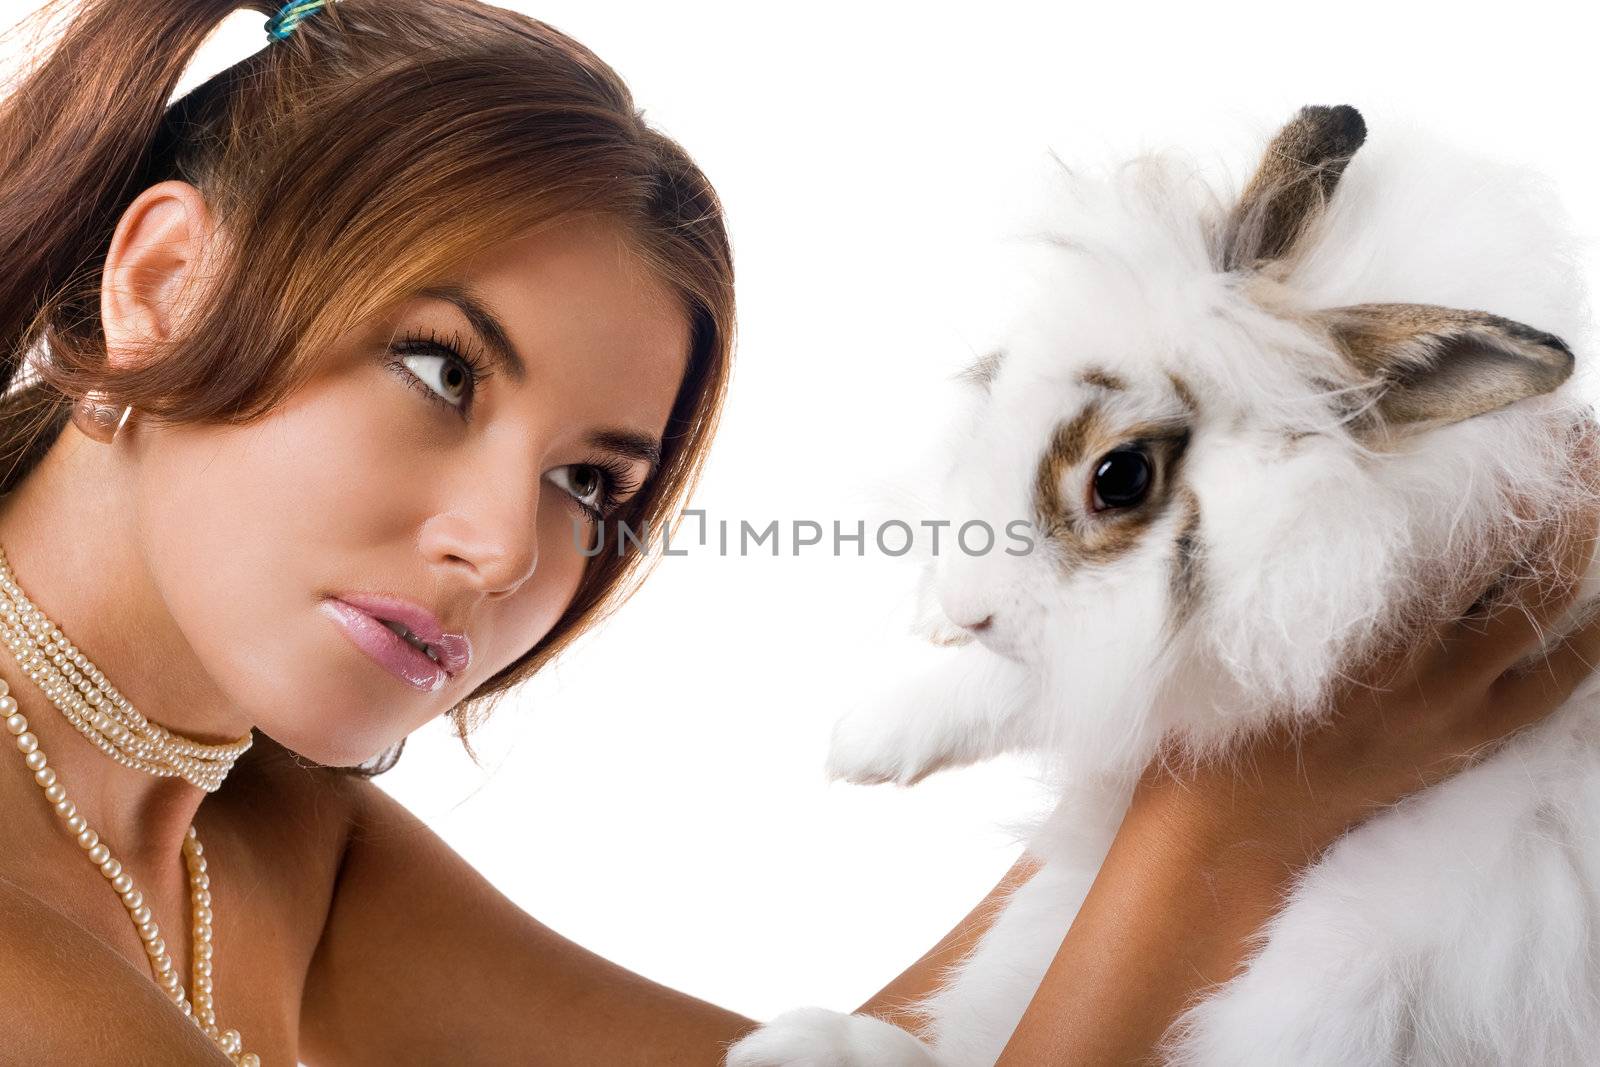 Young woman playing with little rabbit. Focus on girl